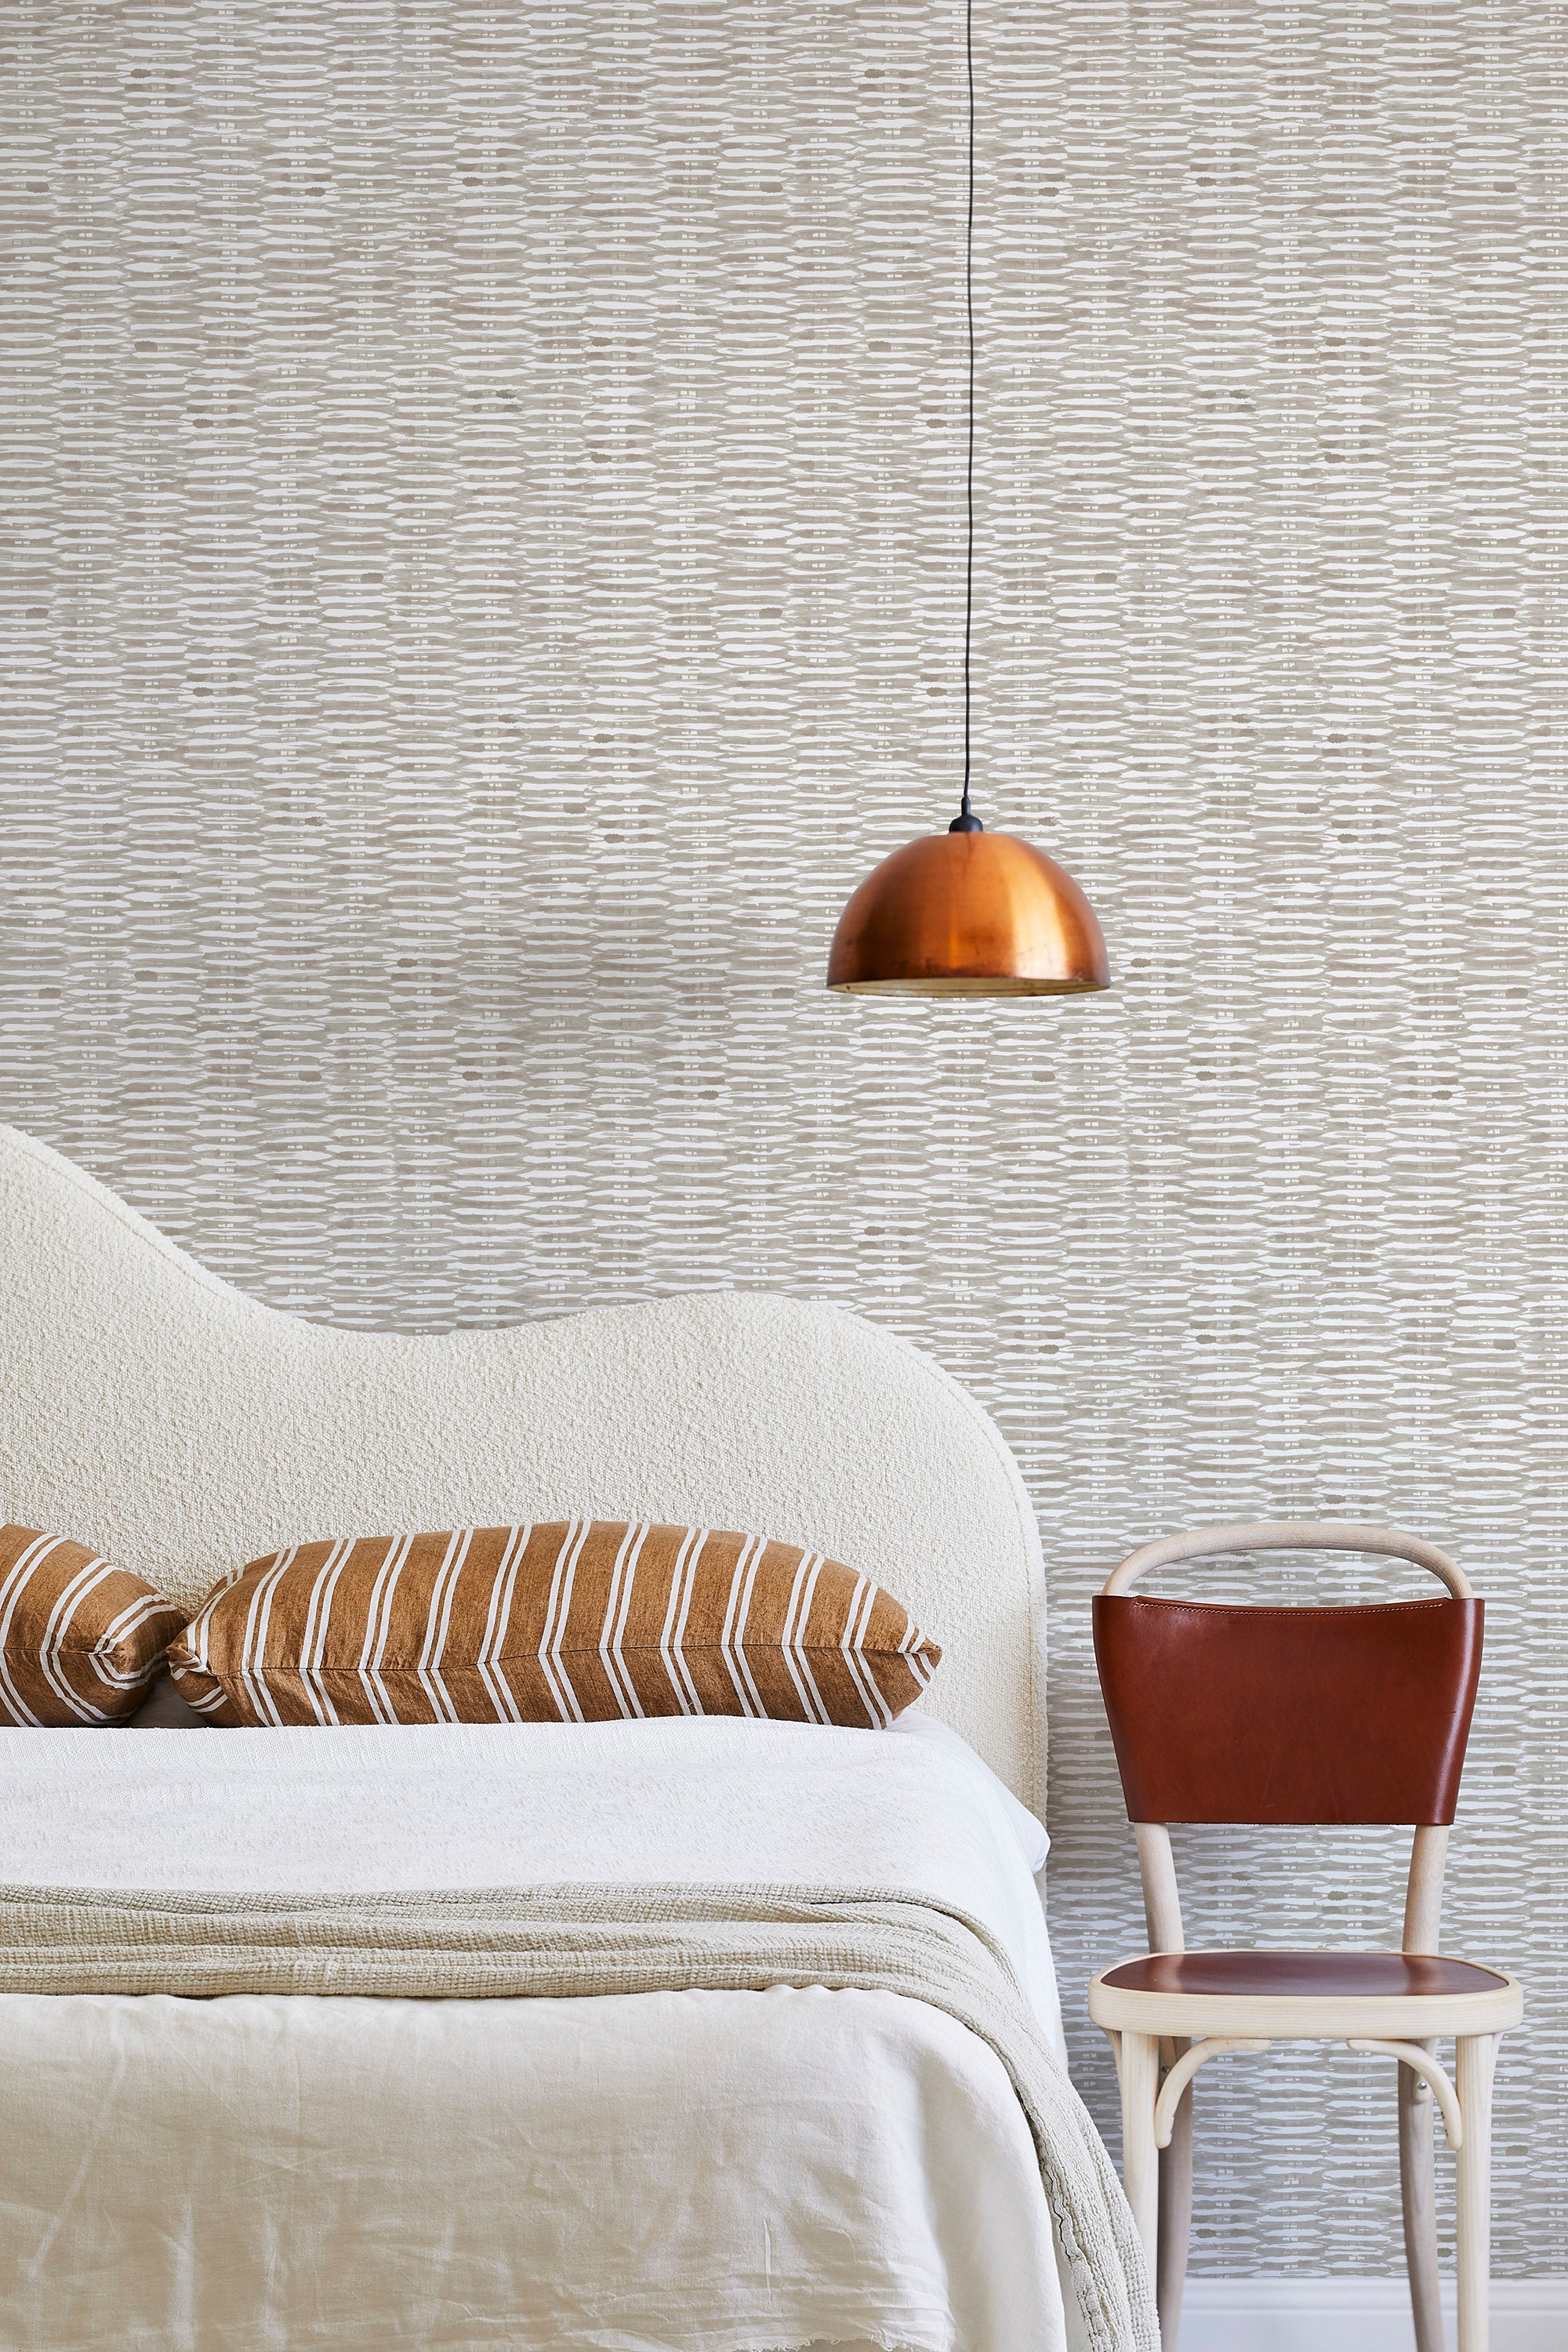 A modernist bed, hanging lamp and chair stand in front of a wall papered in a textural checked print in tan and white.